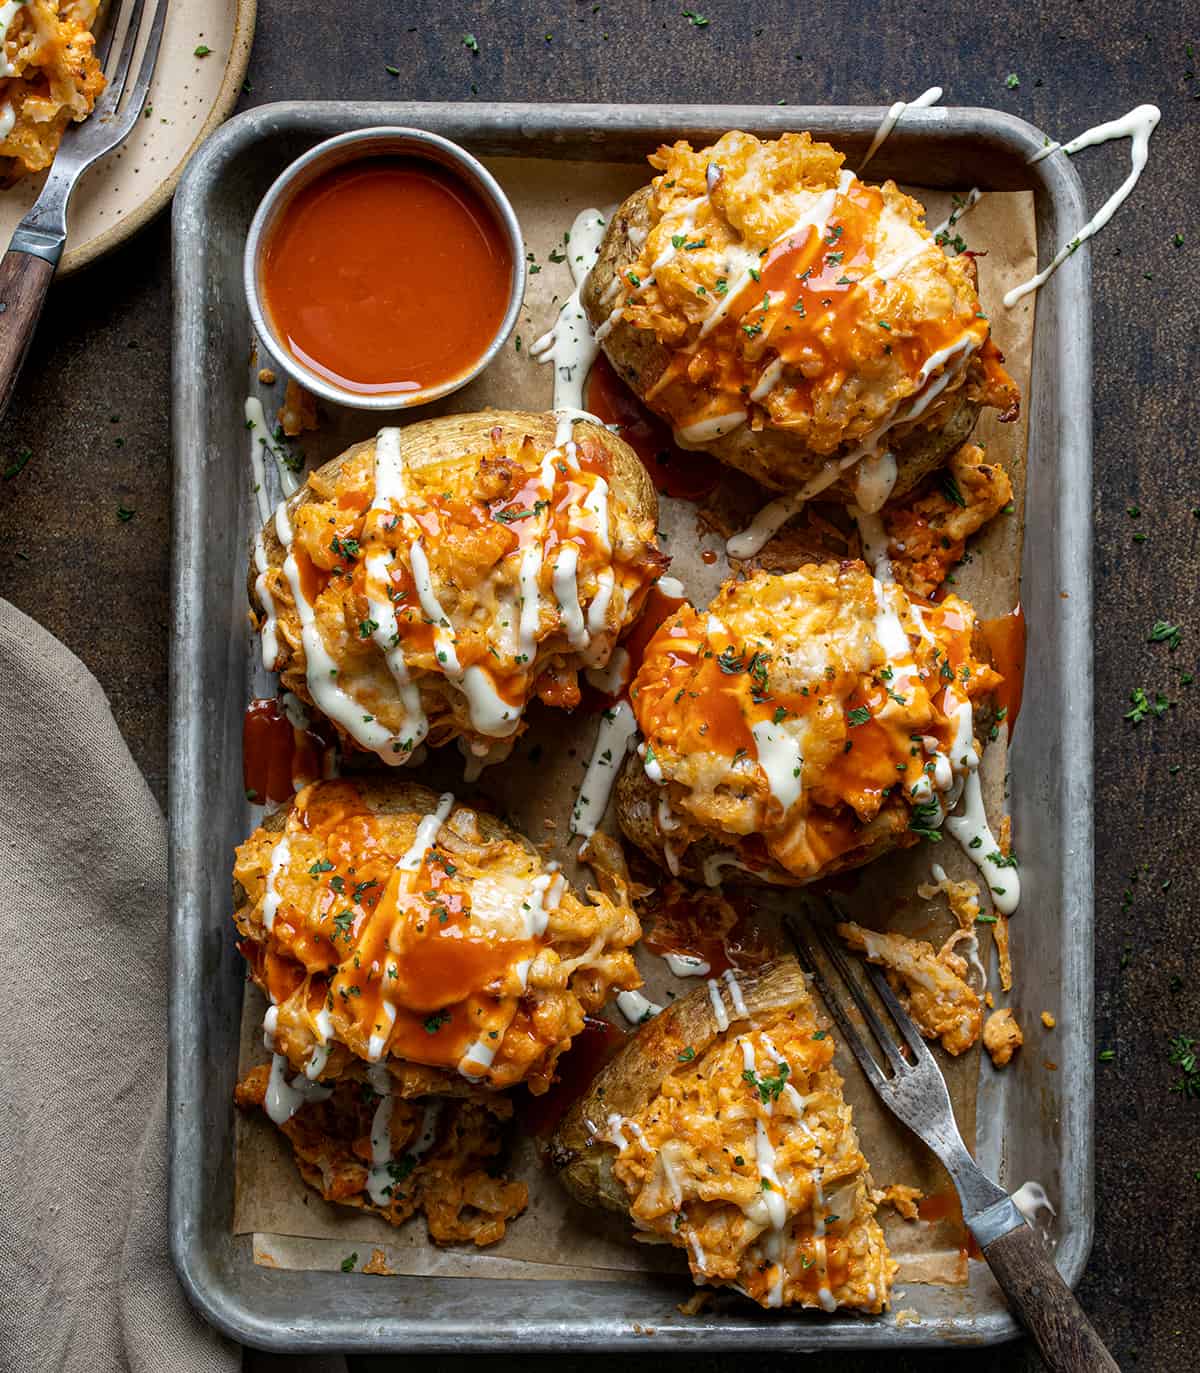 Overhead Image of Buffalo Chicken Twice Baked Potatoes on a Pan with Sauce and One Potato has been Cut in half.